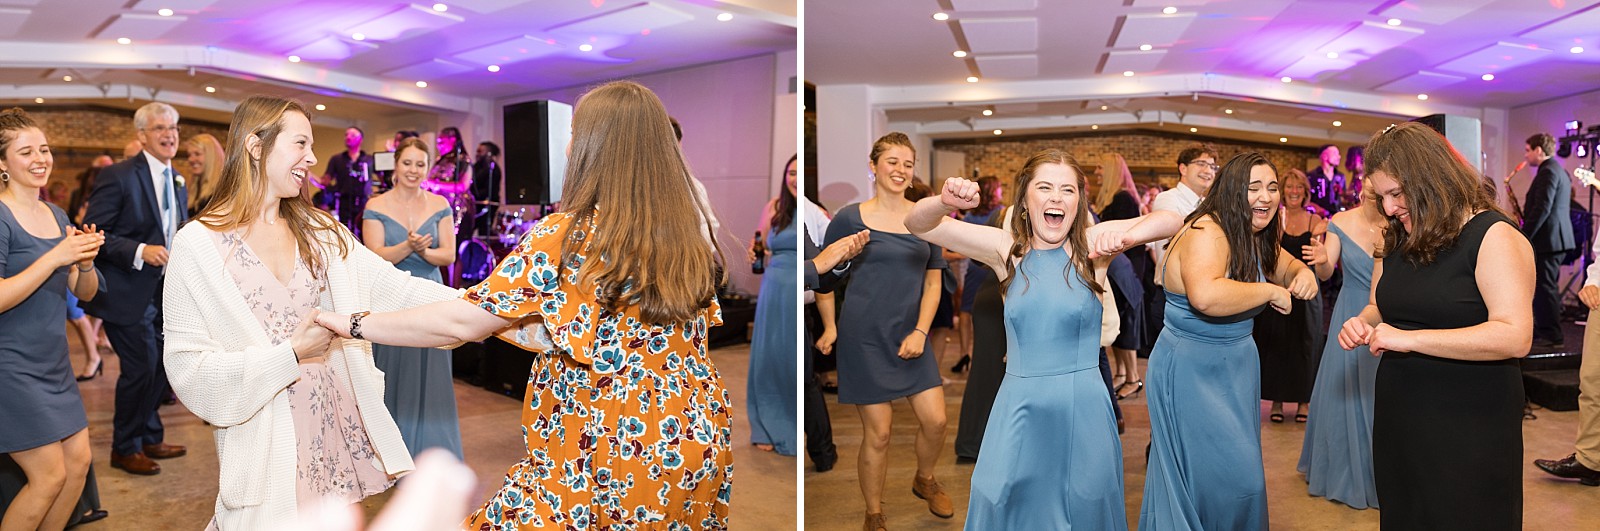 wedding guests dancing  | The Meadows in Raleigh | Raleigh NC Wedding Photographer